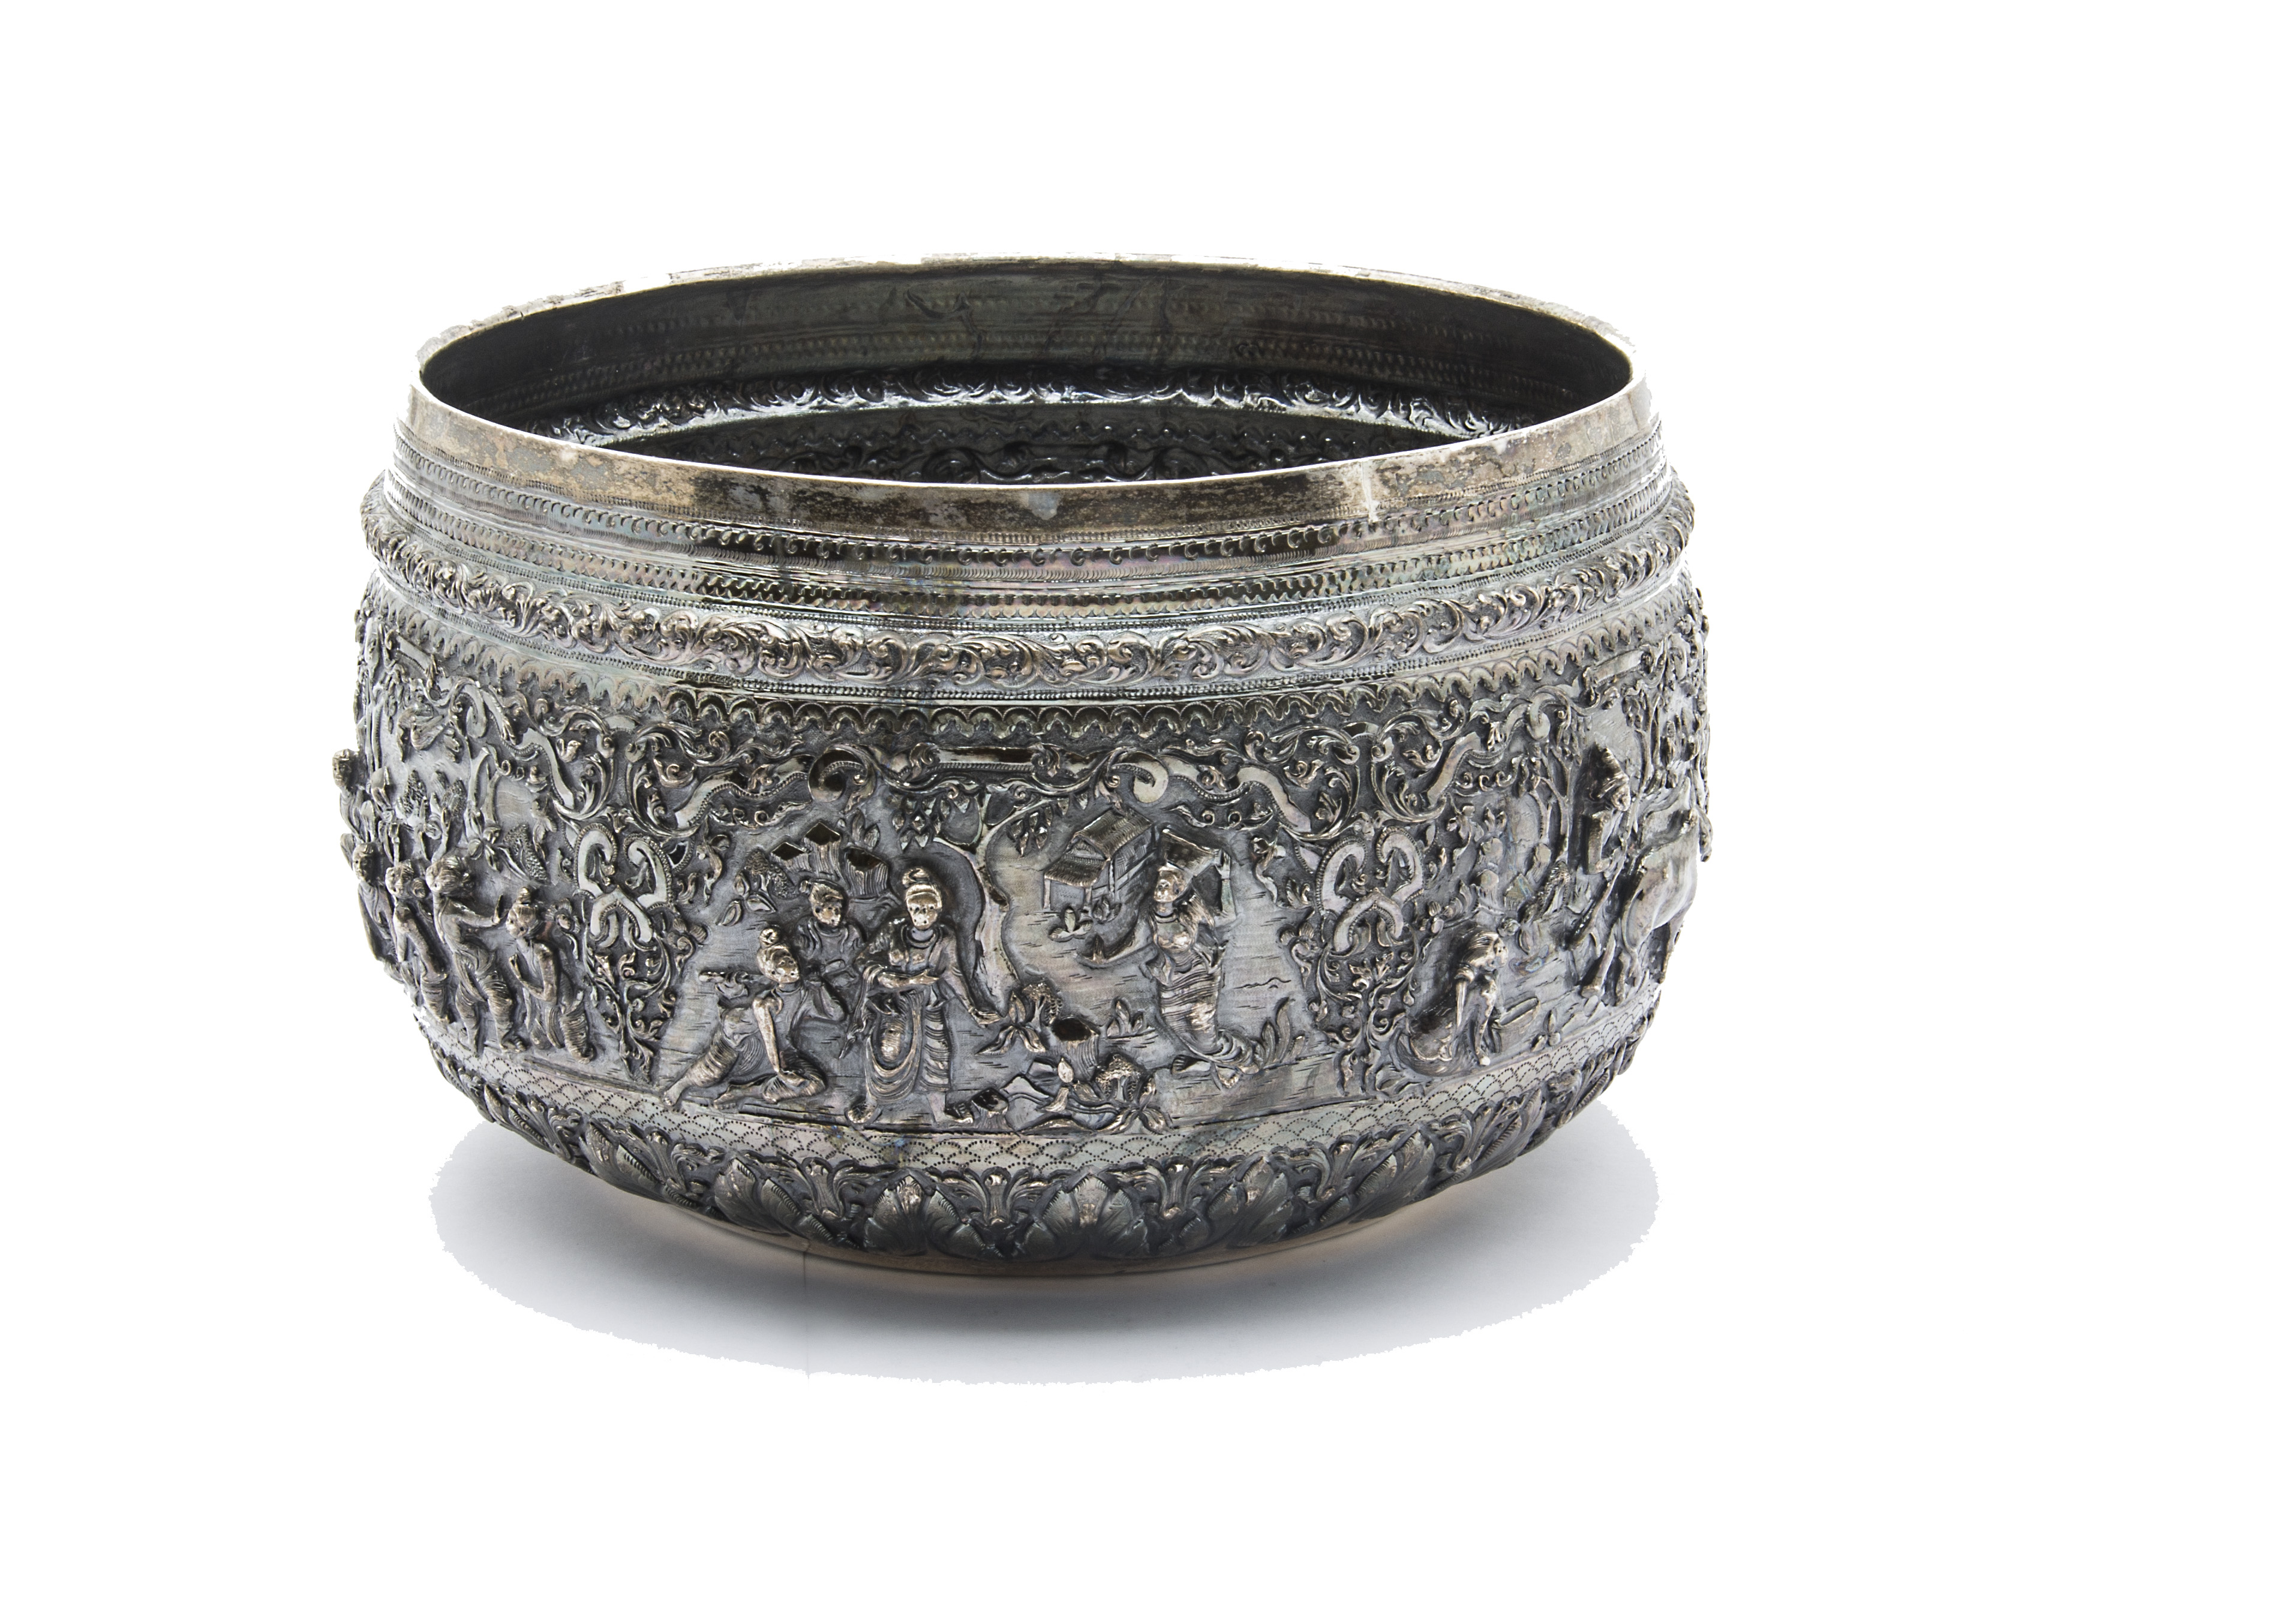 A large 19th century Indian silver bowl, having intricate embossed scenes of figures with ornate - Image 2 of 4